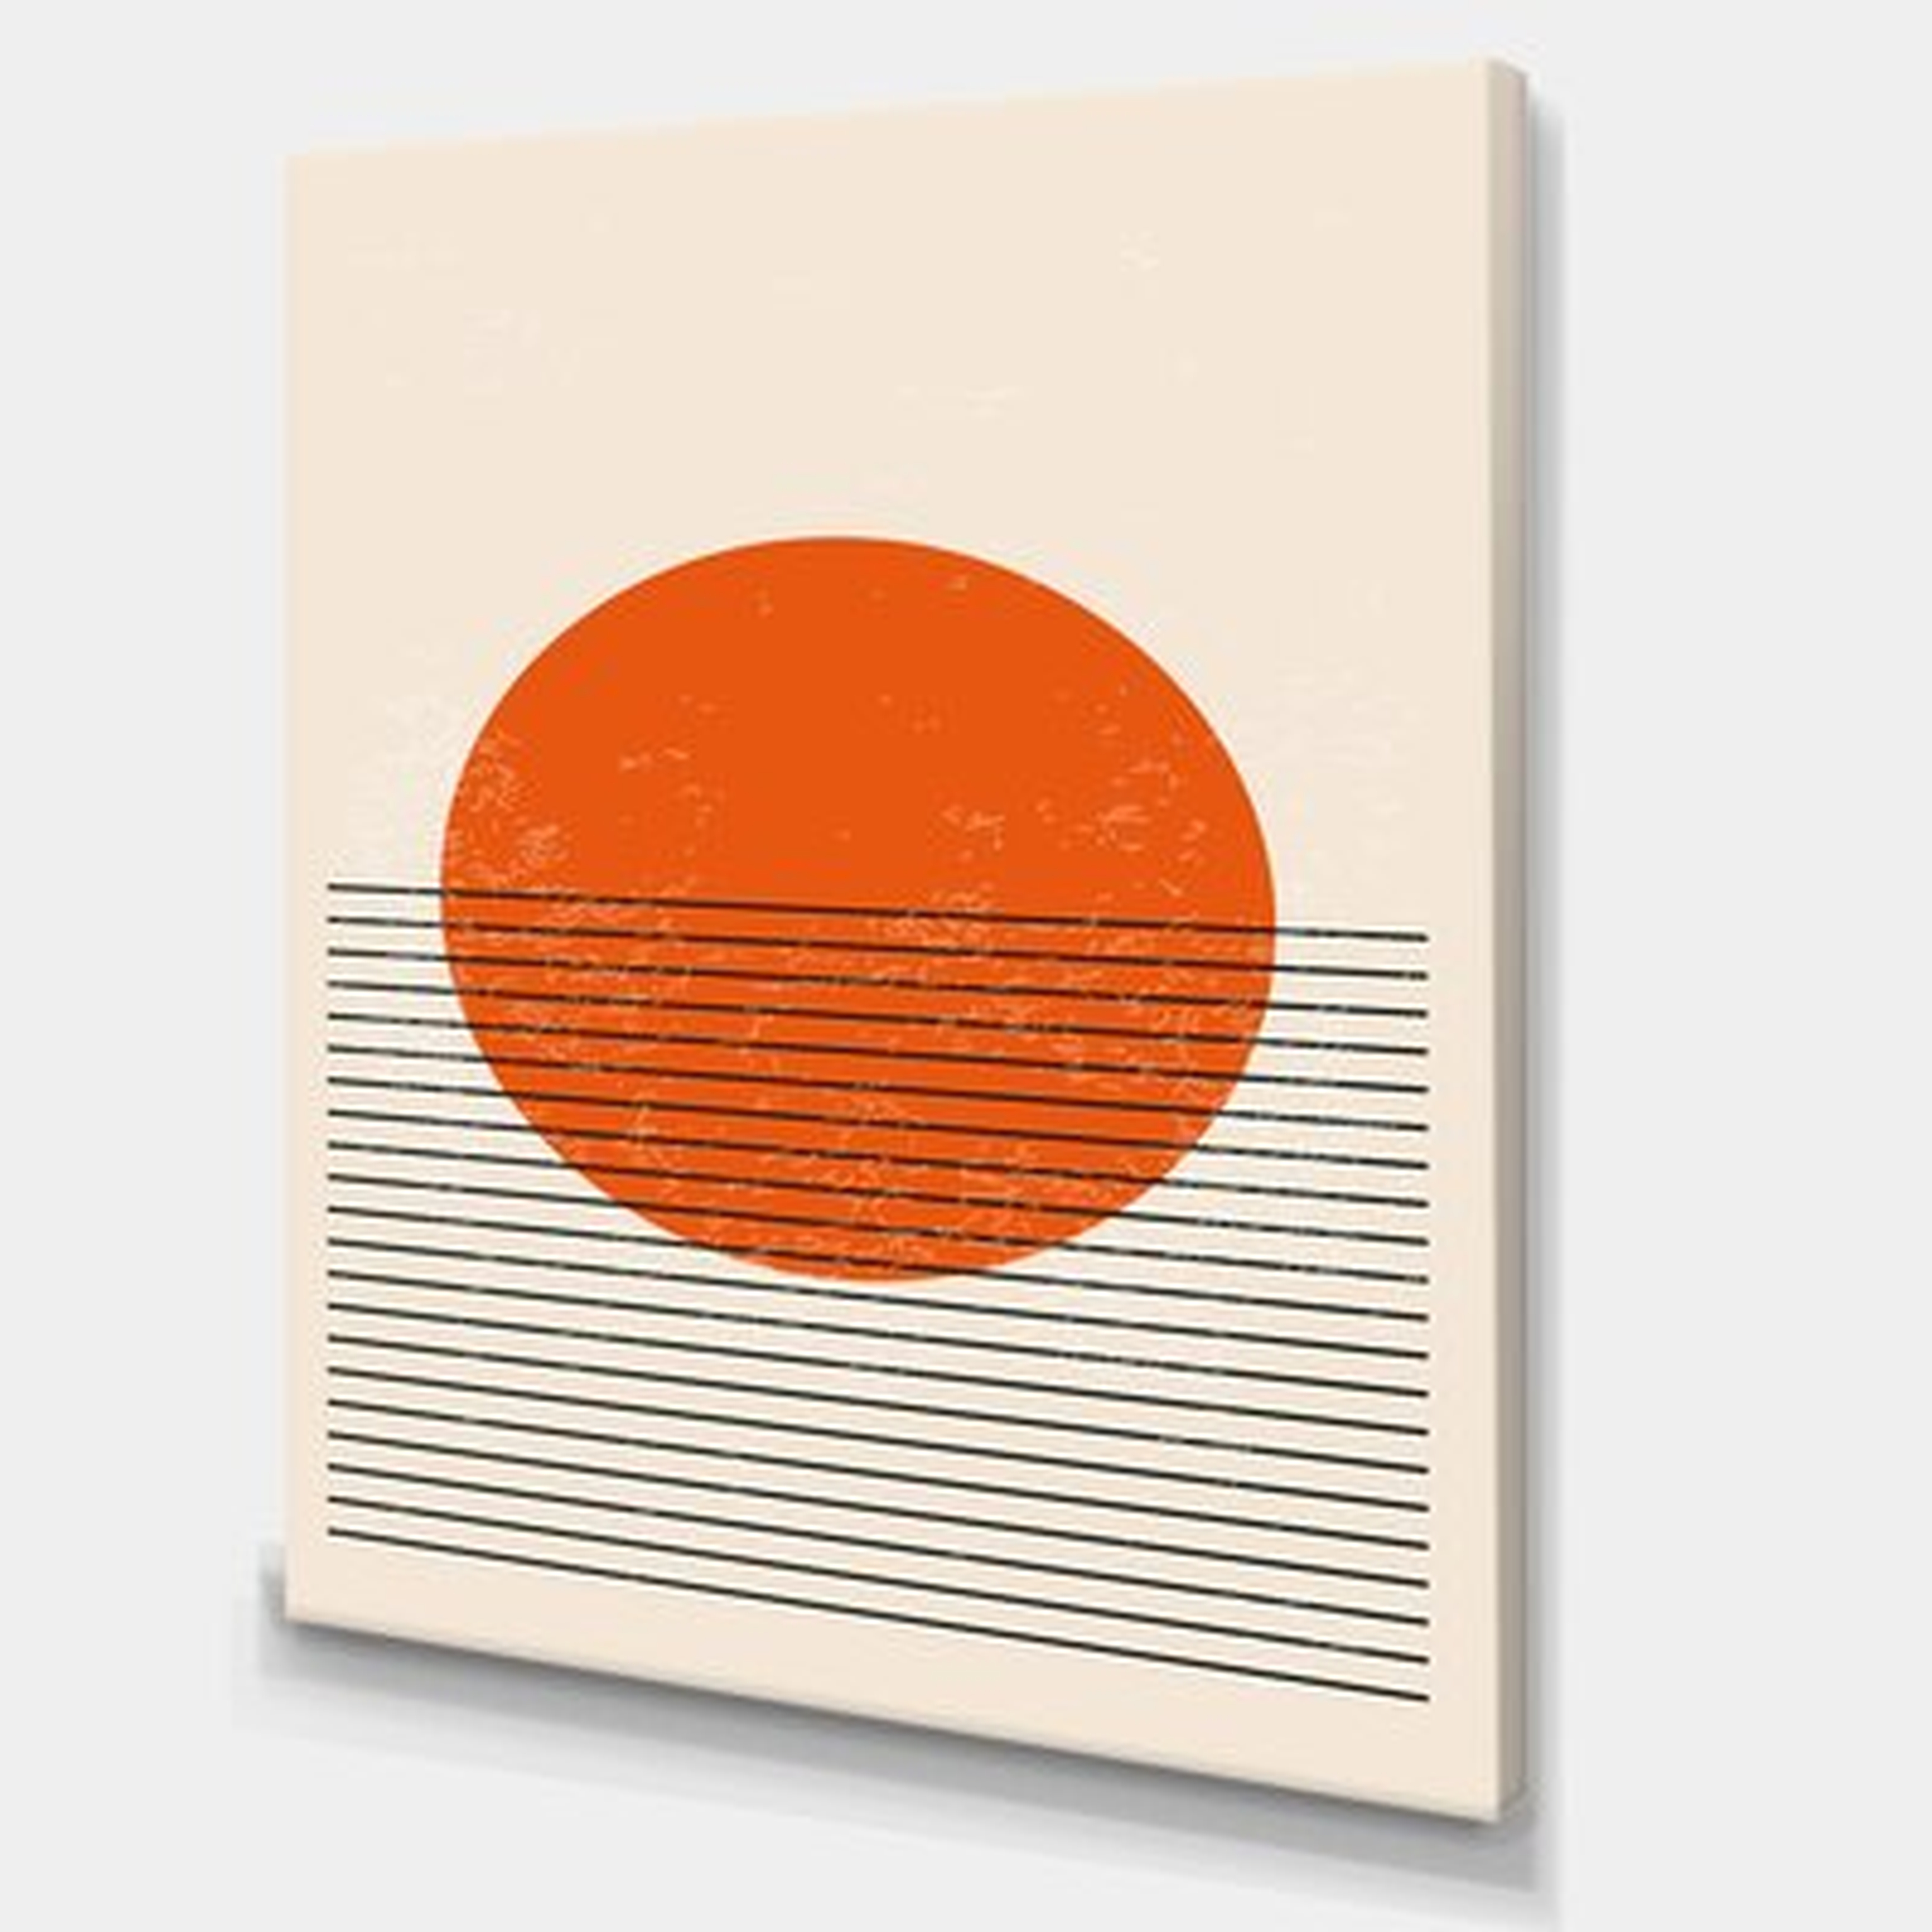 Minimal Geometric Compostions of Elementary Forms XIII - Graphic Art Print on Canvas - Wayfair